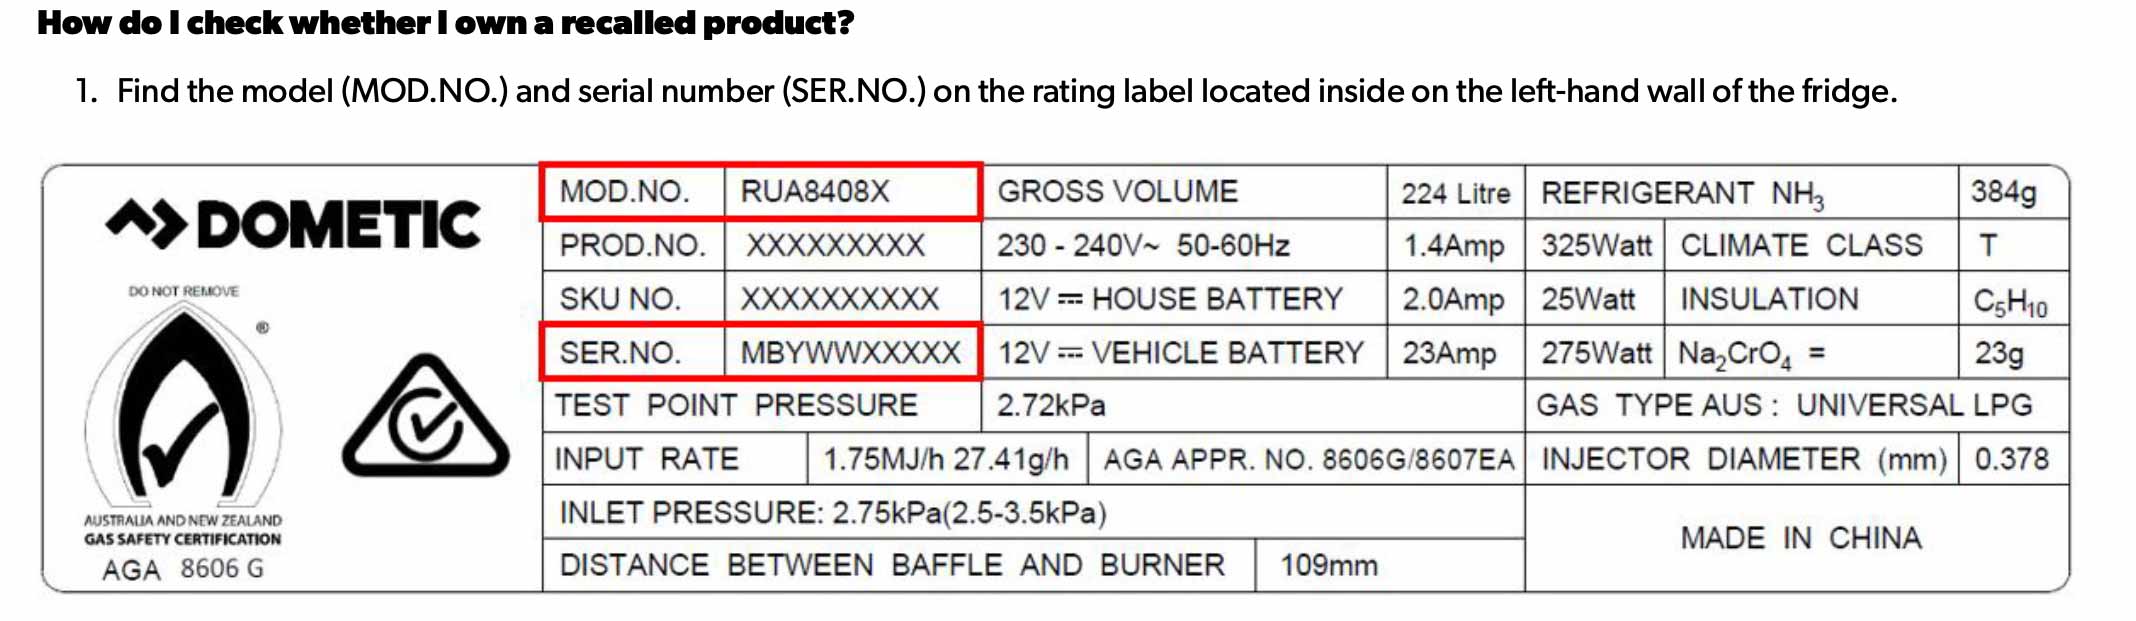 Dometic Product Recall